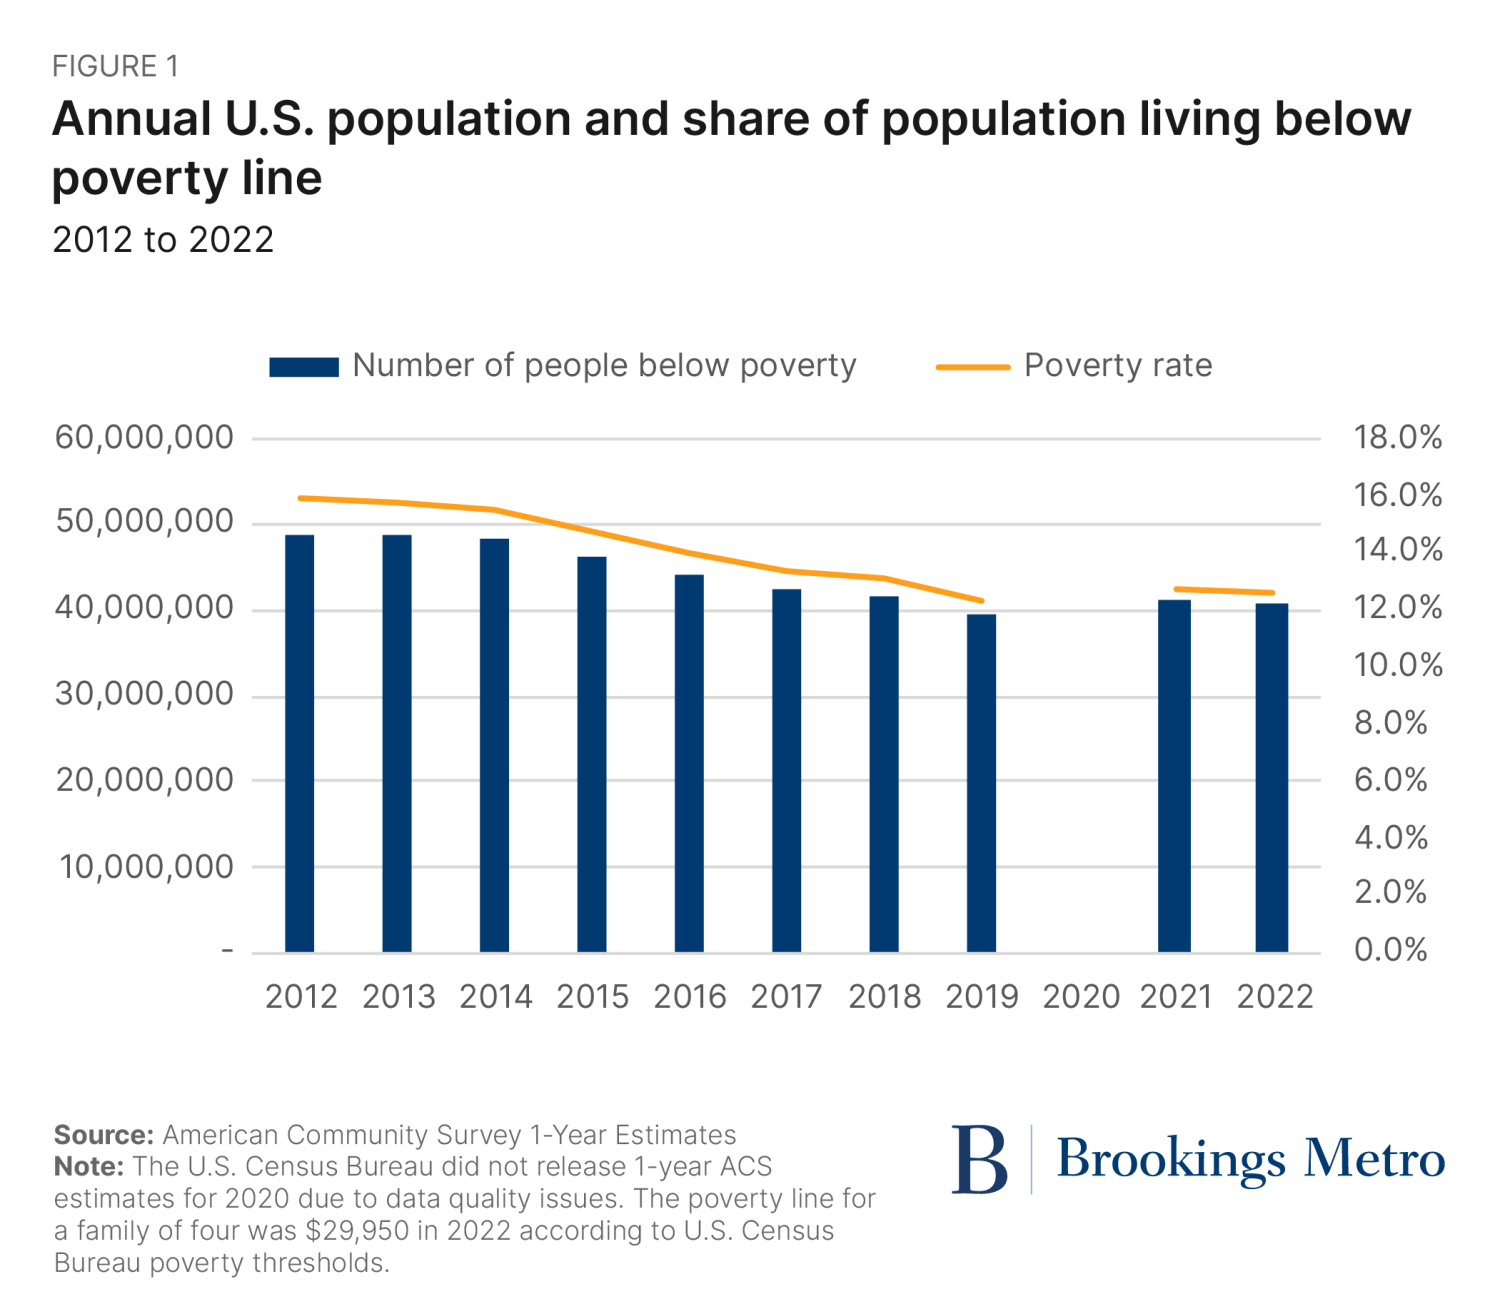 Figure 1. Annual U.S. population and share of population living below poverty line